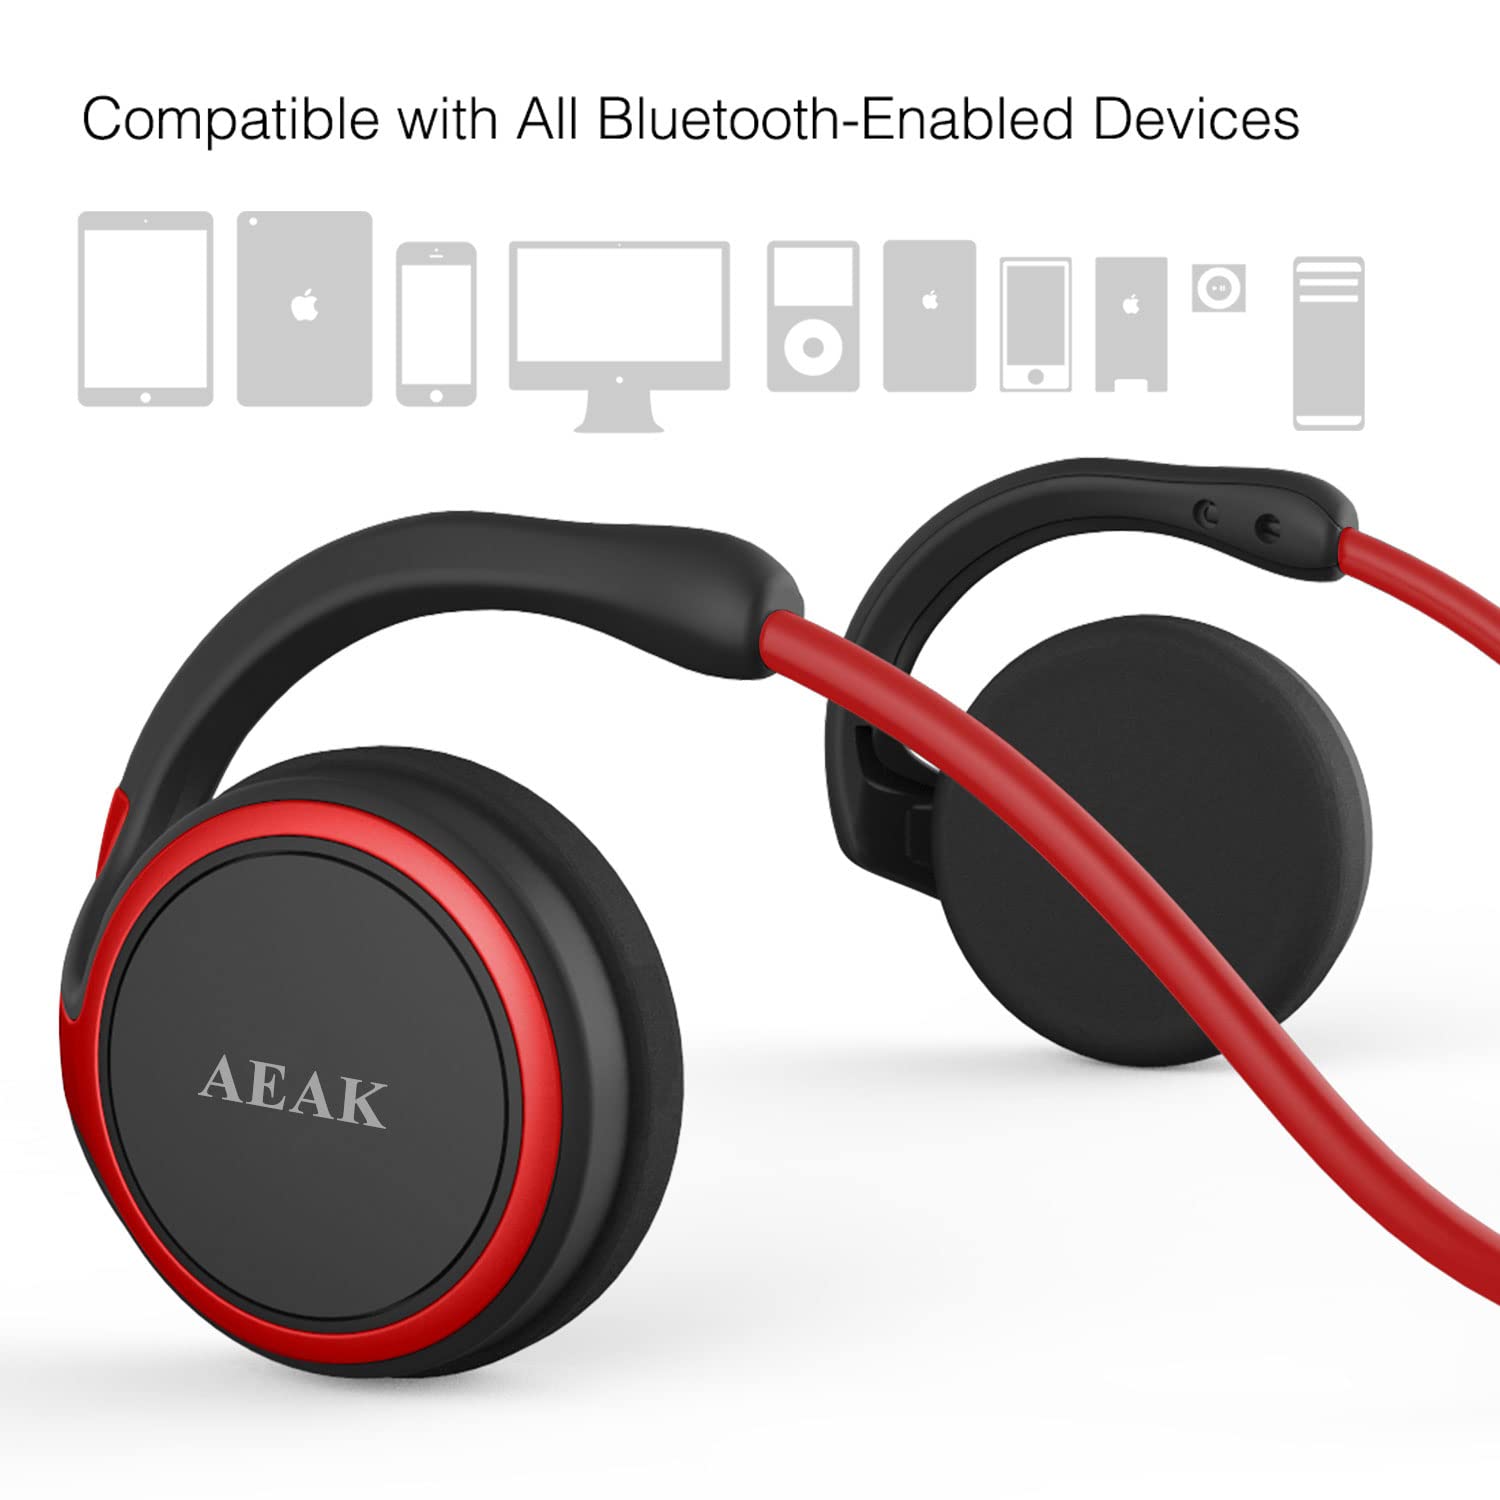 Bluetooth Wireless Running Headphones, Zero Pressure Design Earphone with HiFi Stereo Sound, Clear Voice Capture Technology, Foldable Pocket Size for Gym/Yoga/Travel(Red)